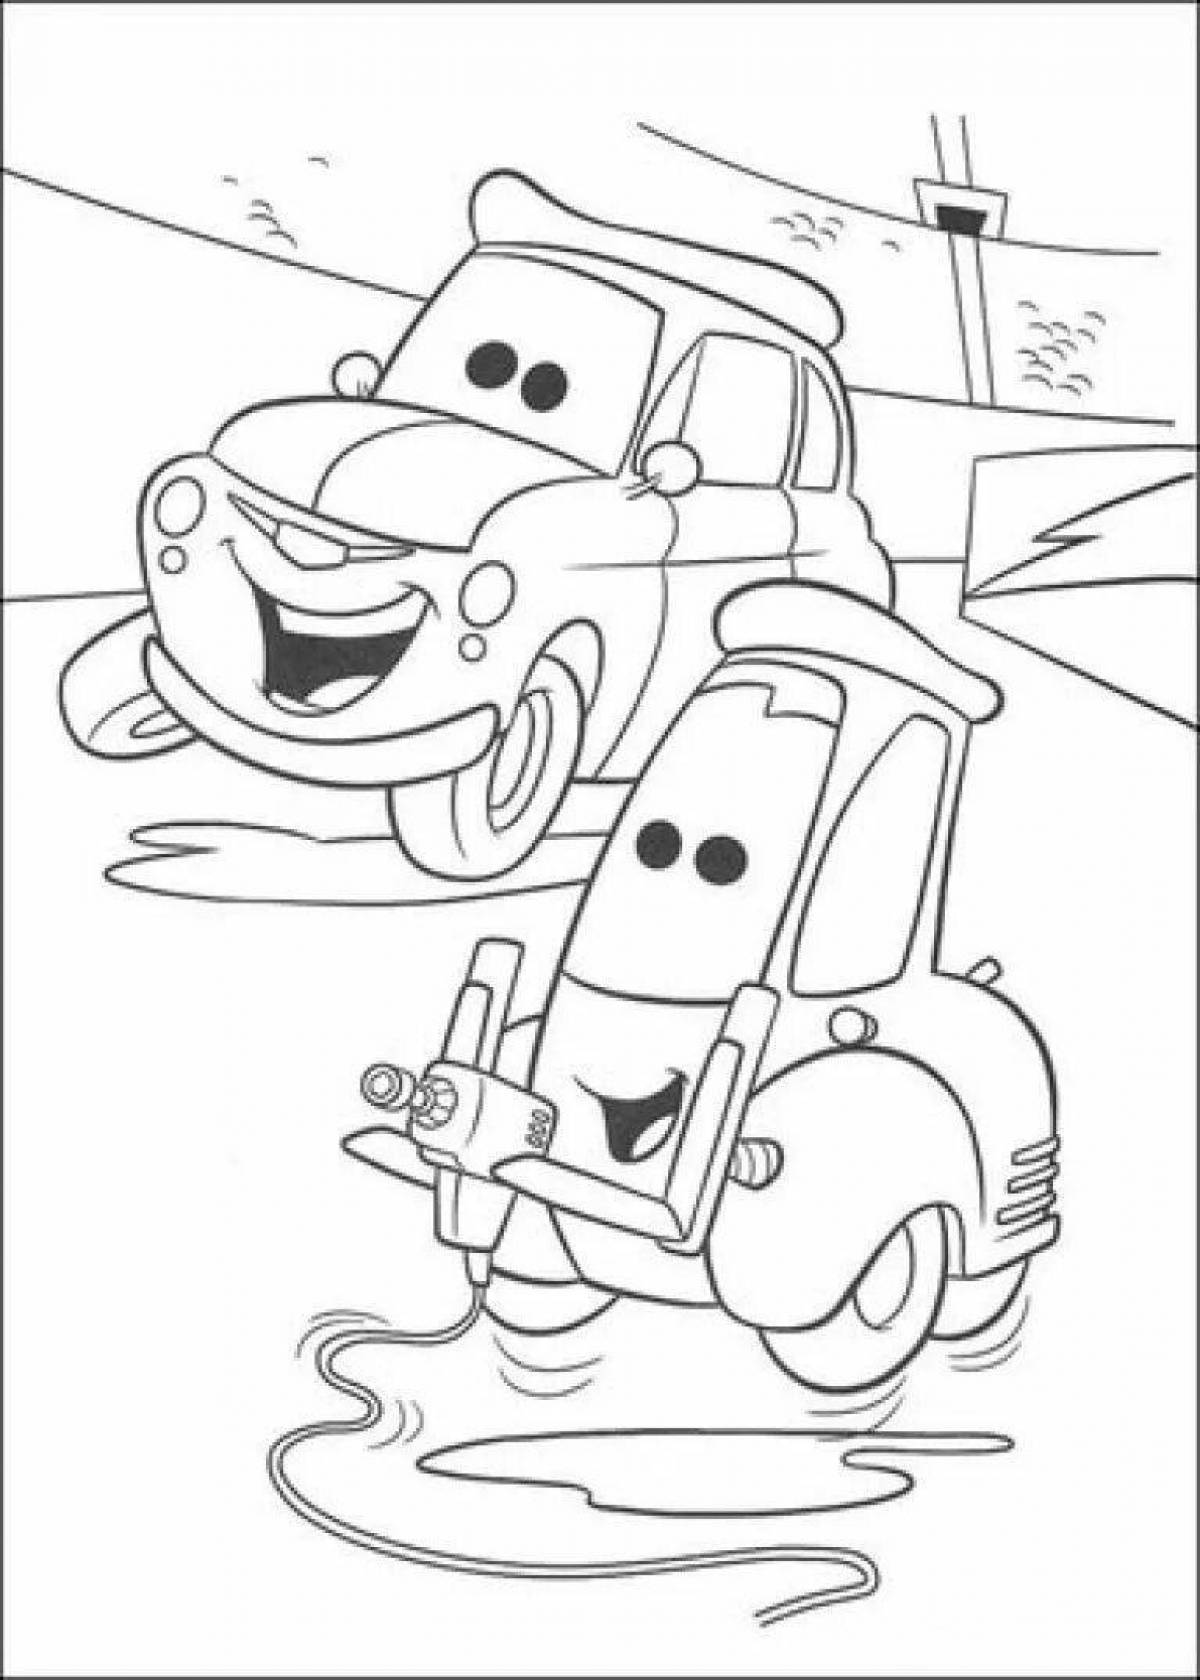 Playful cartoon coloring book for 5-6 year old boys